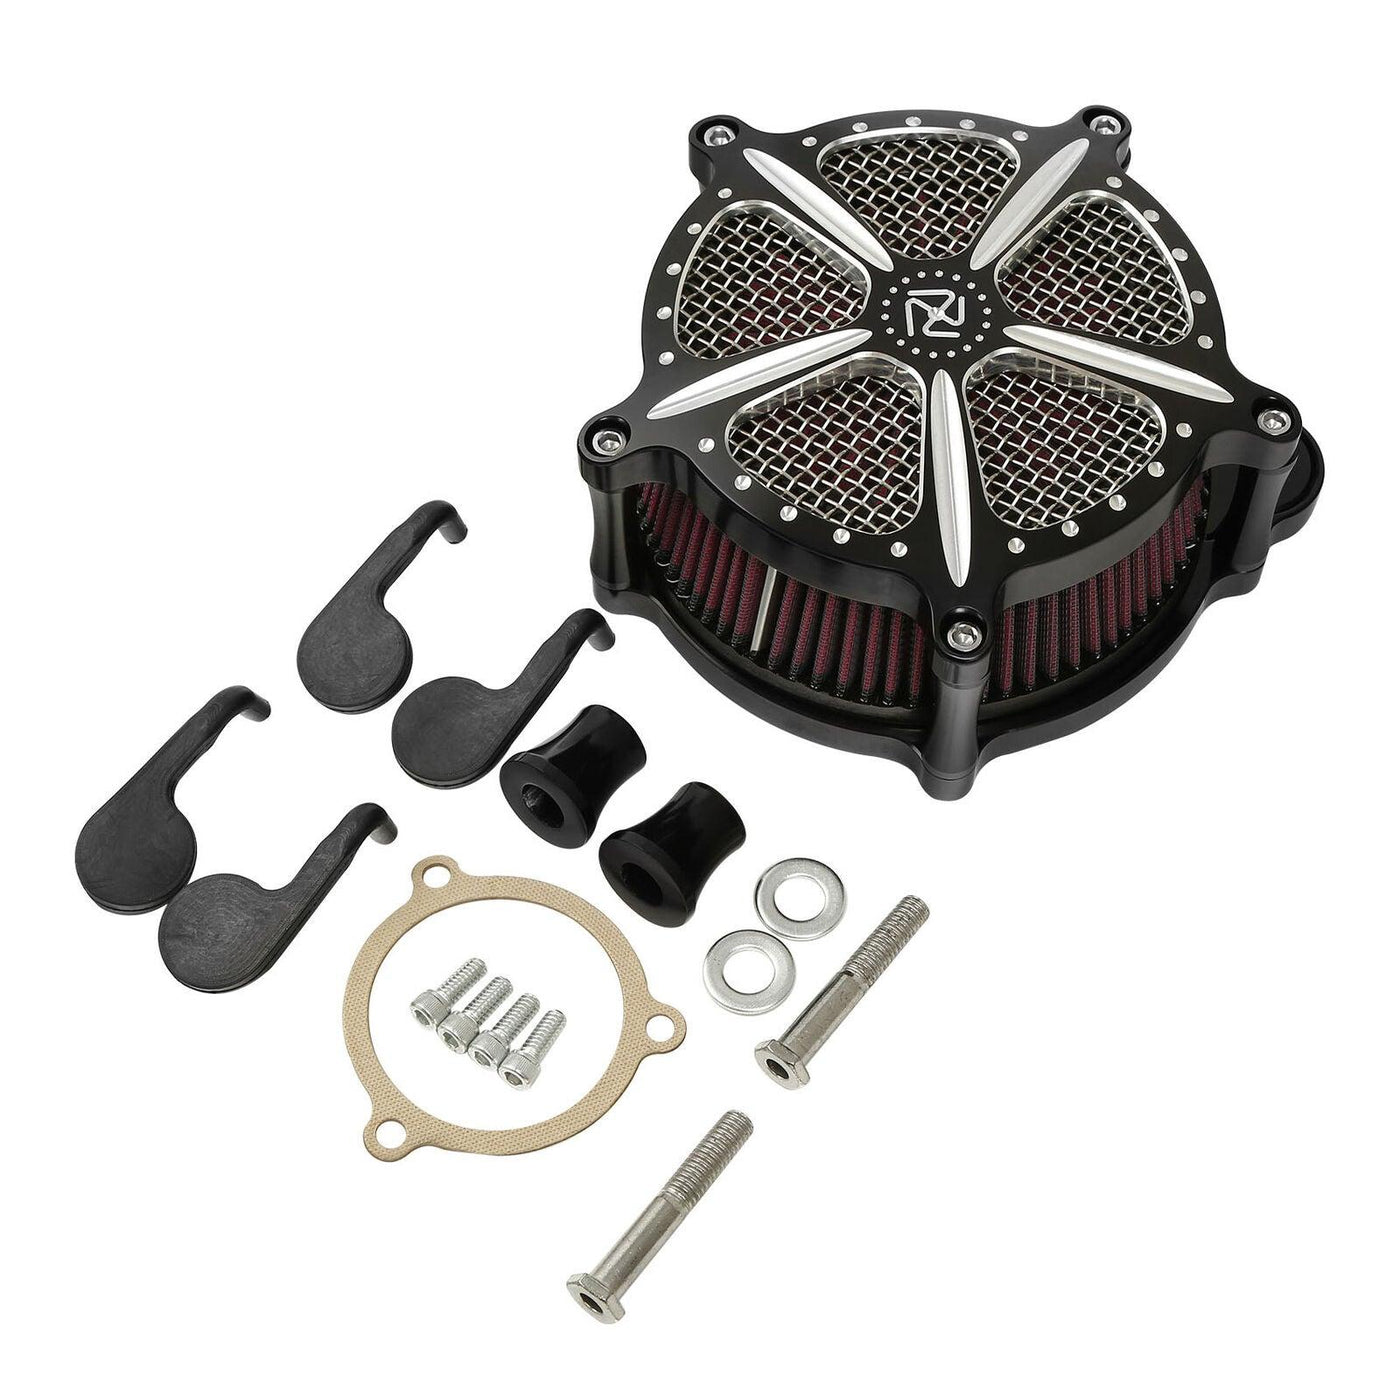 Black CNC Air Cleaner Fit For Harley Electra Street Glide Road King Glide 08-16 - Moto Life Products